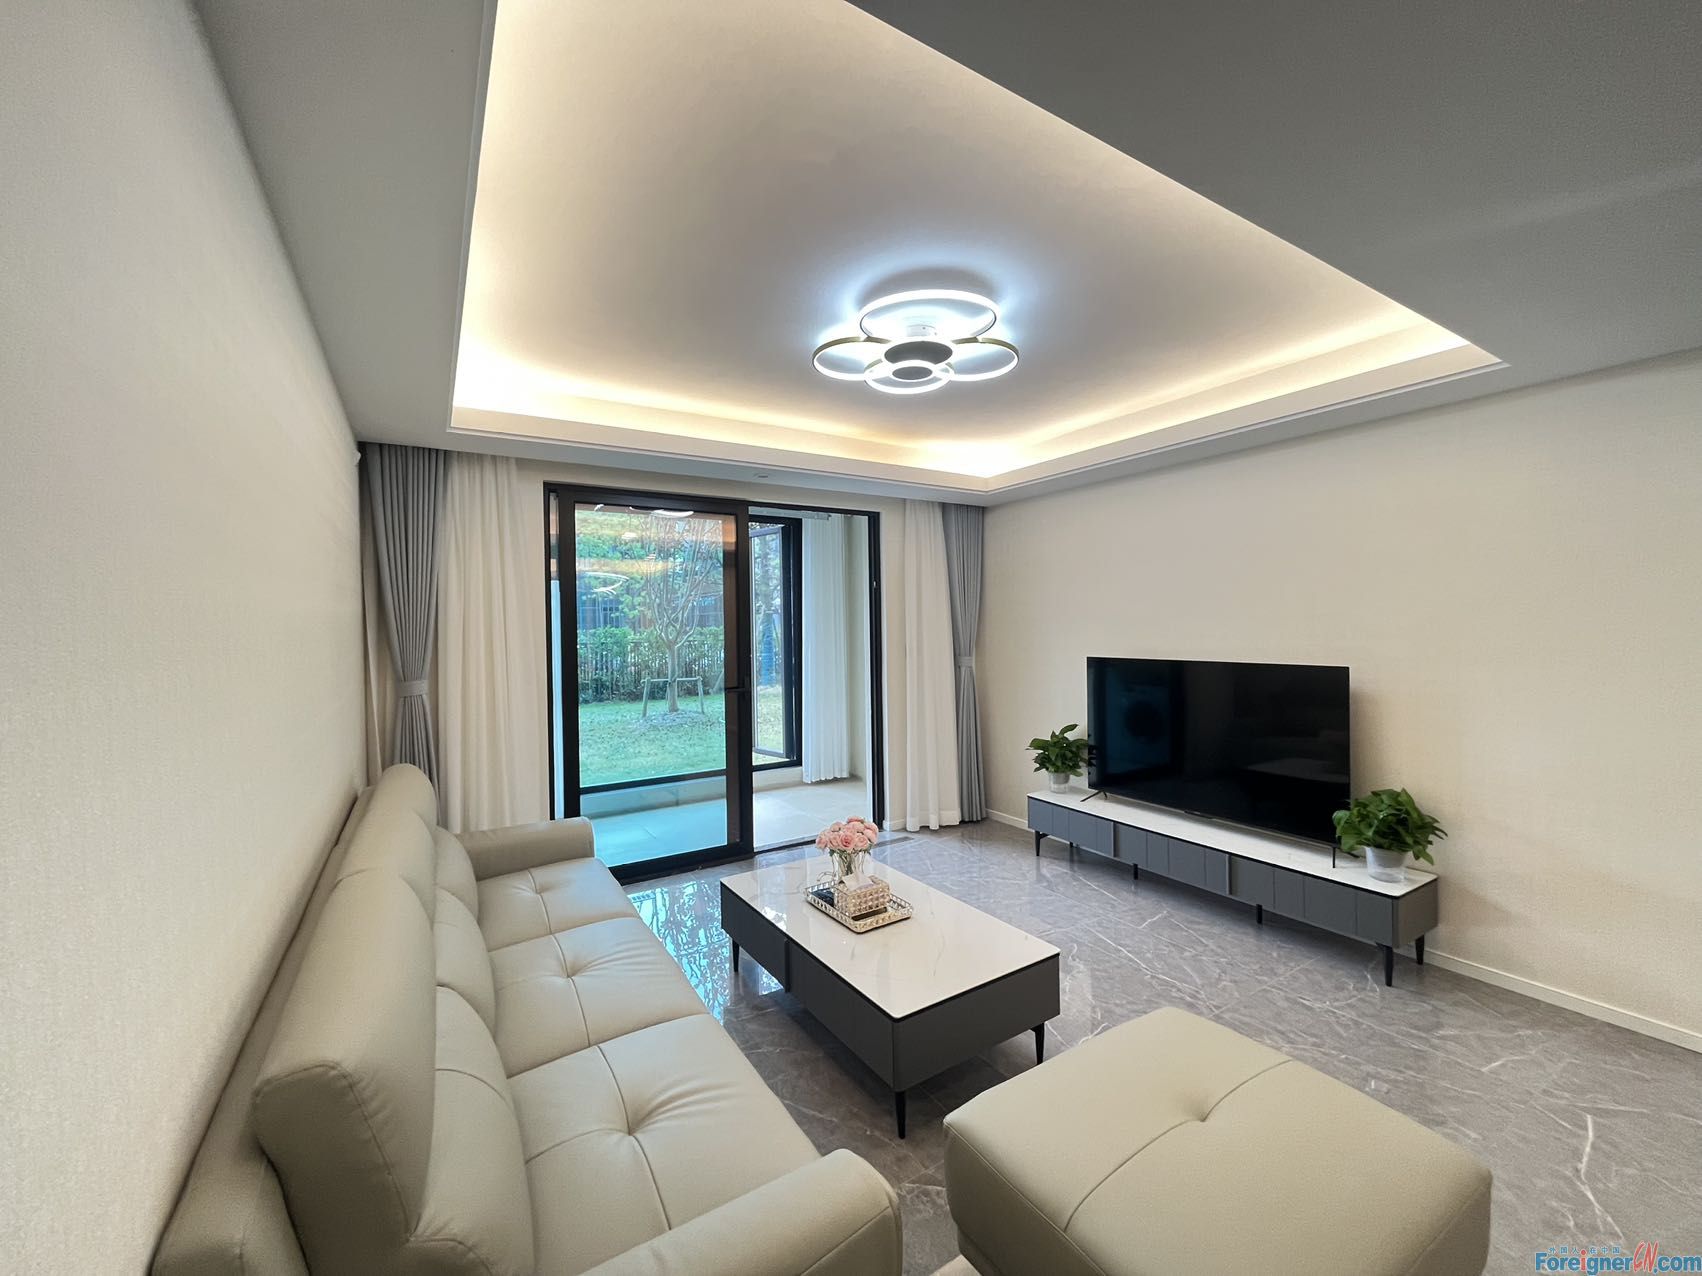 Amazing!!! outdoor garden apartment rent in Suzhou/4 bedrooms and 2 bathrooms/central AC, super bright and clean/in Suzhou Science Technology Town/Suzhou New District/Close to Eton House international school/shopping mall